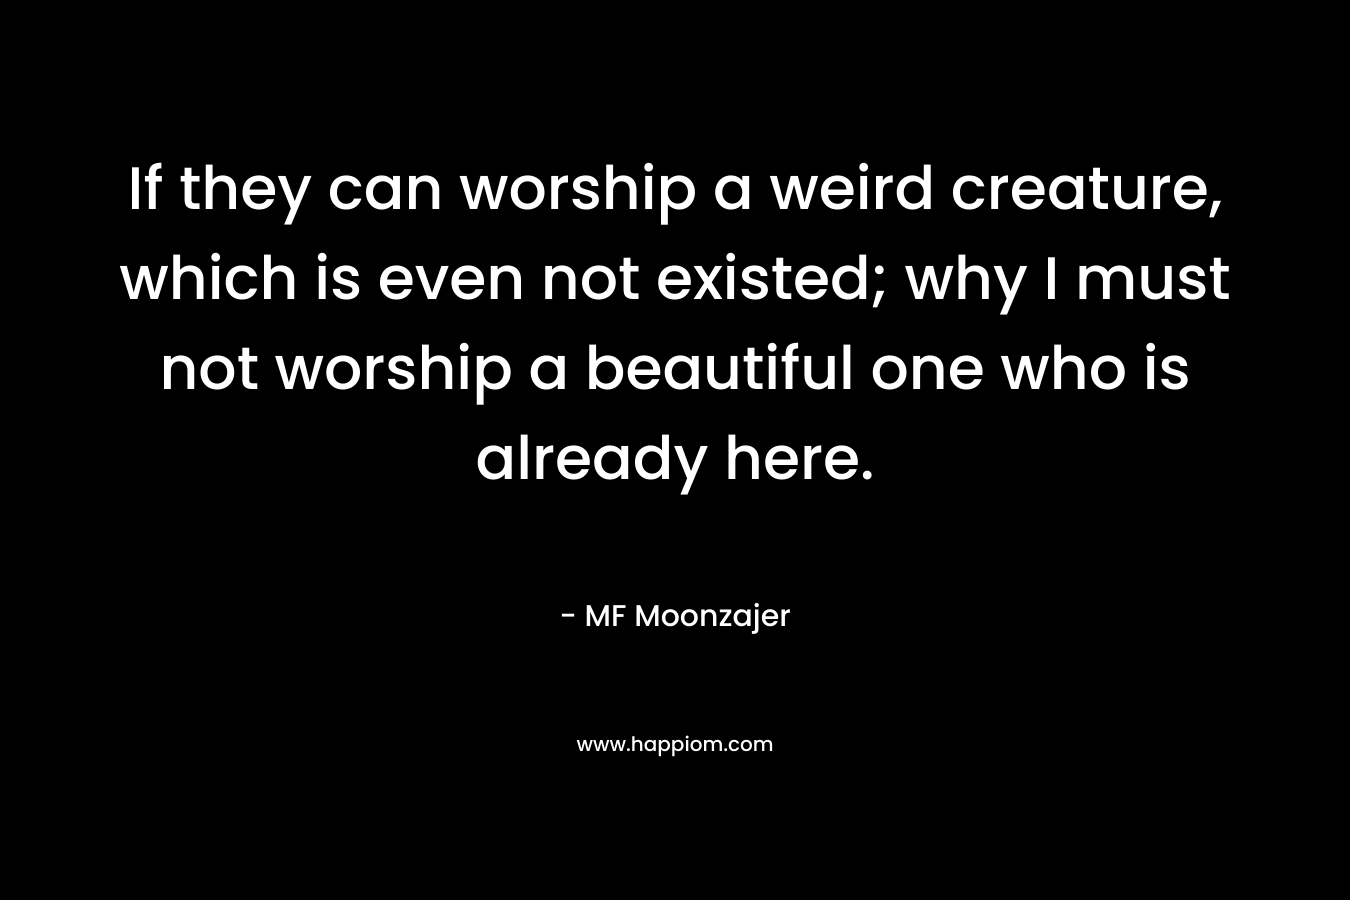 If they can worship a weird creature, which is even not existed; why I must not worship a beautiful one who is already here. – MF Moonzajer